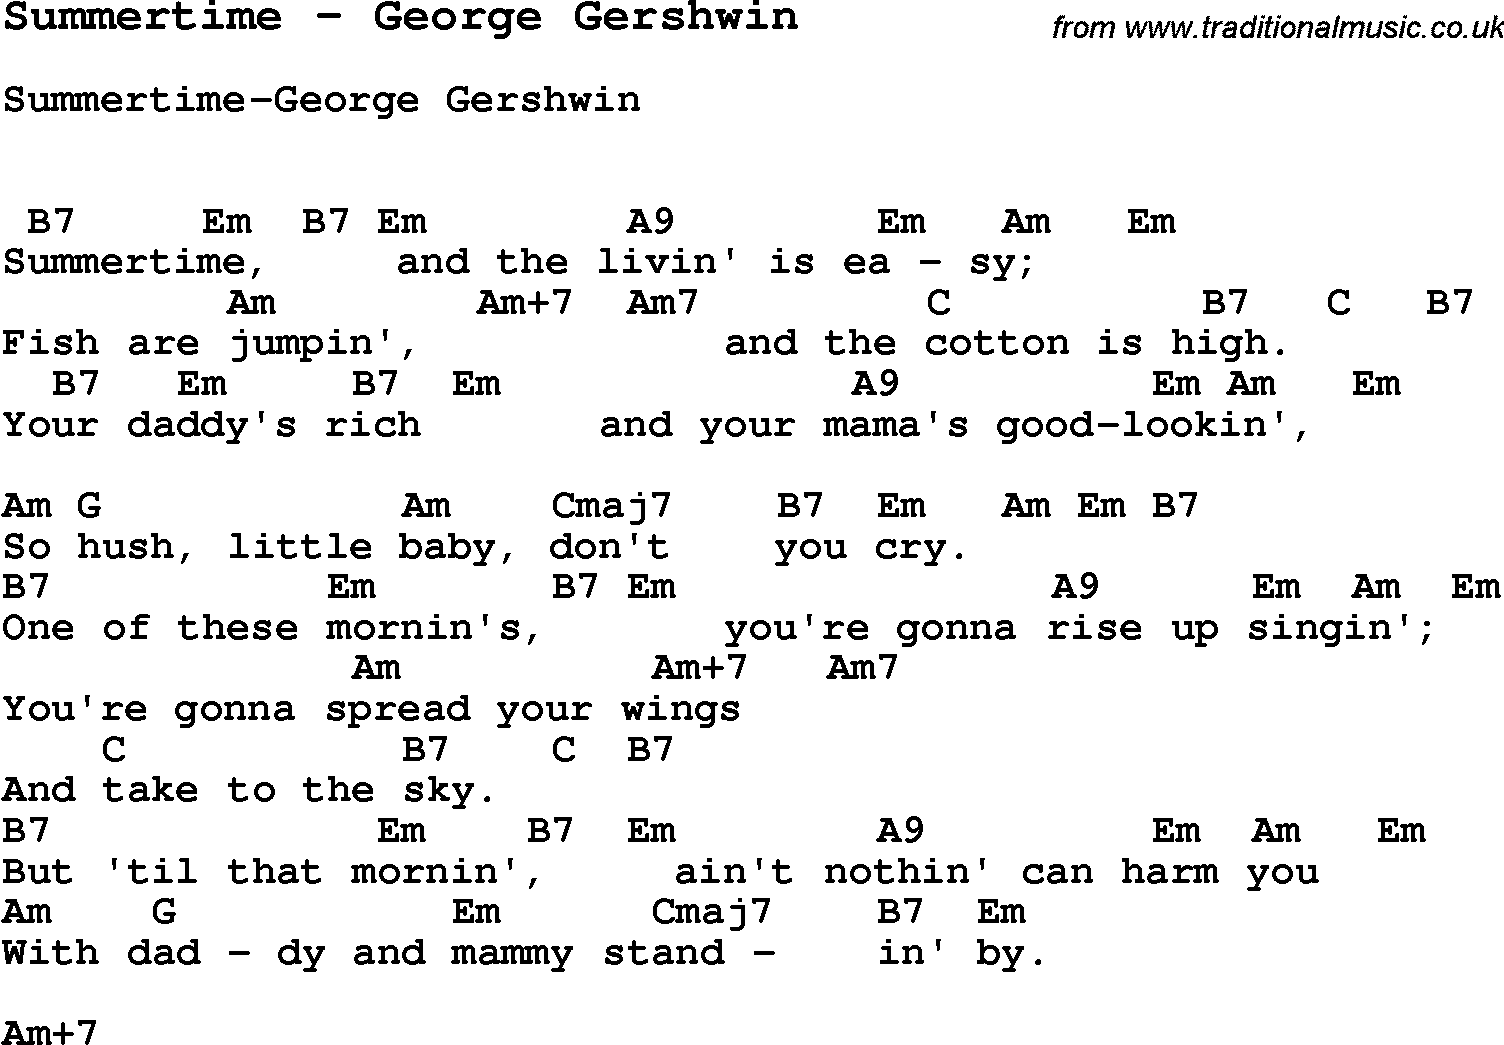 Song Summertime by George Gershwin, with lyrics for vocal performance and accompaniment chords for Ukulele, Guitar Banjo etc.